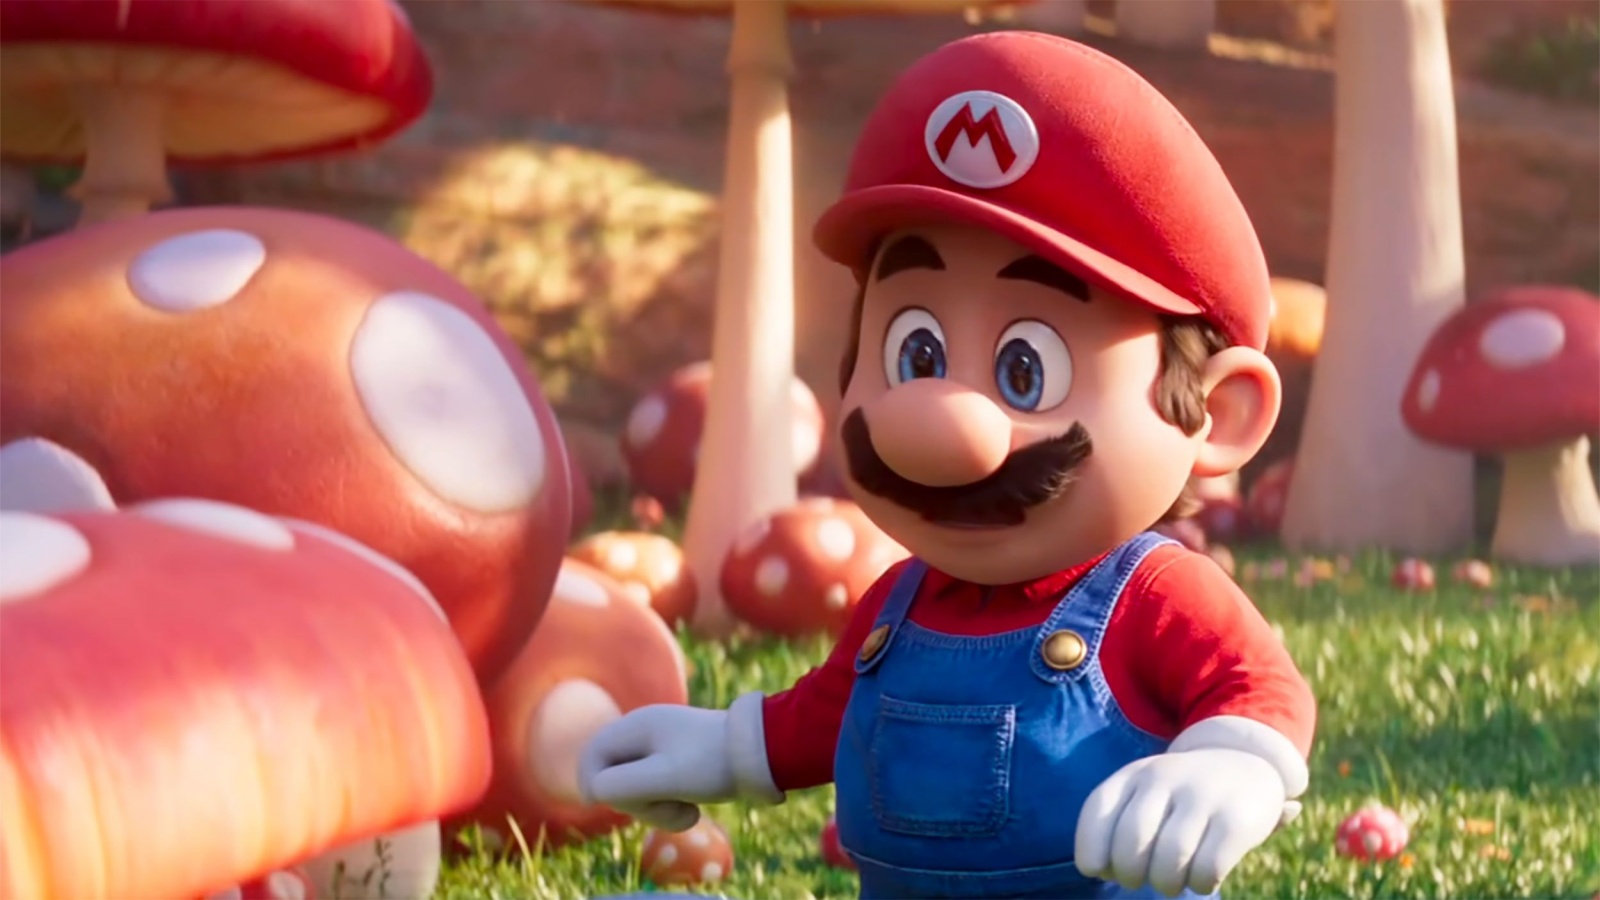 The Super Mario Bros. movie you downloaded might be a trojan